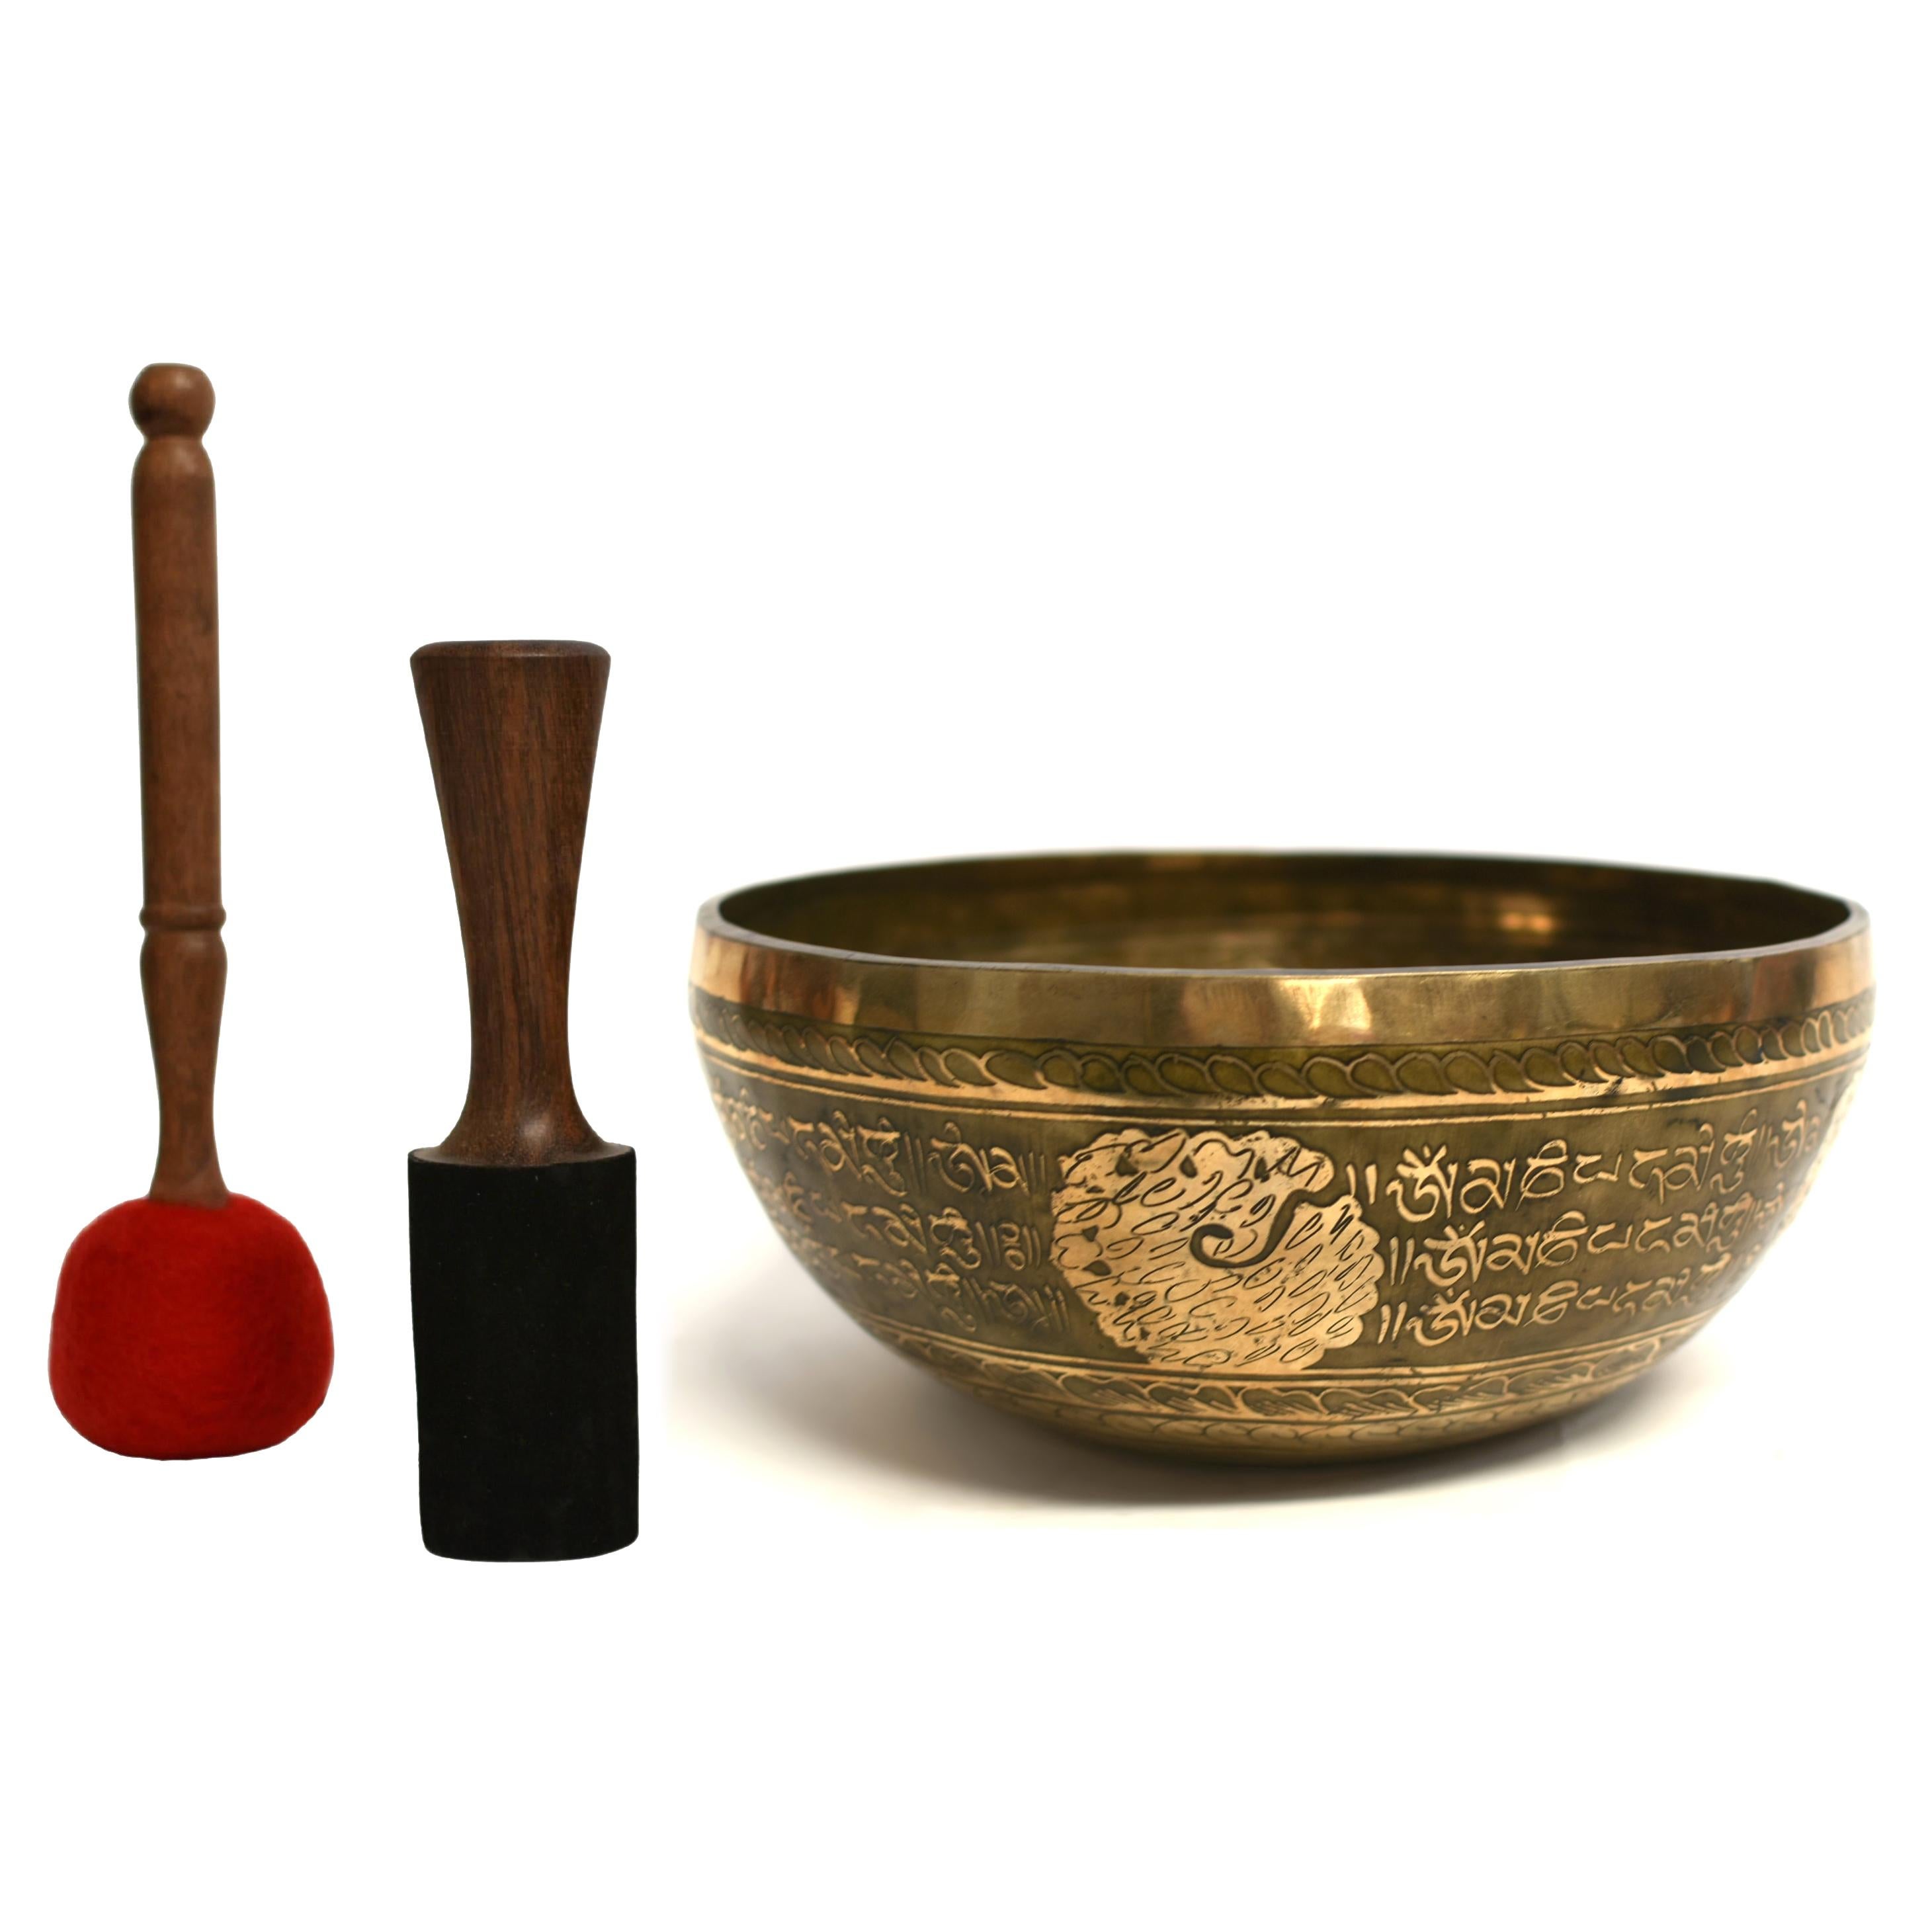 A giant 13-inch singing bowl, weighing over 6 pounds, crafted from solid bronze with intricate inlay works. The interior at its center sits Buddha on a lotus throne in dhyana asana, surrounded by an aura of divine illumination. Behind him, a